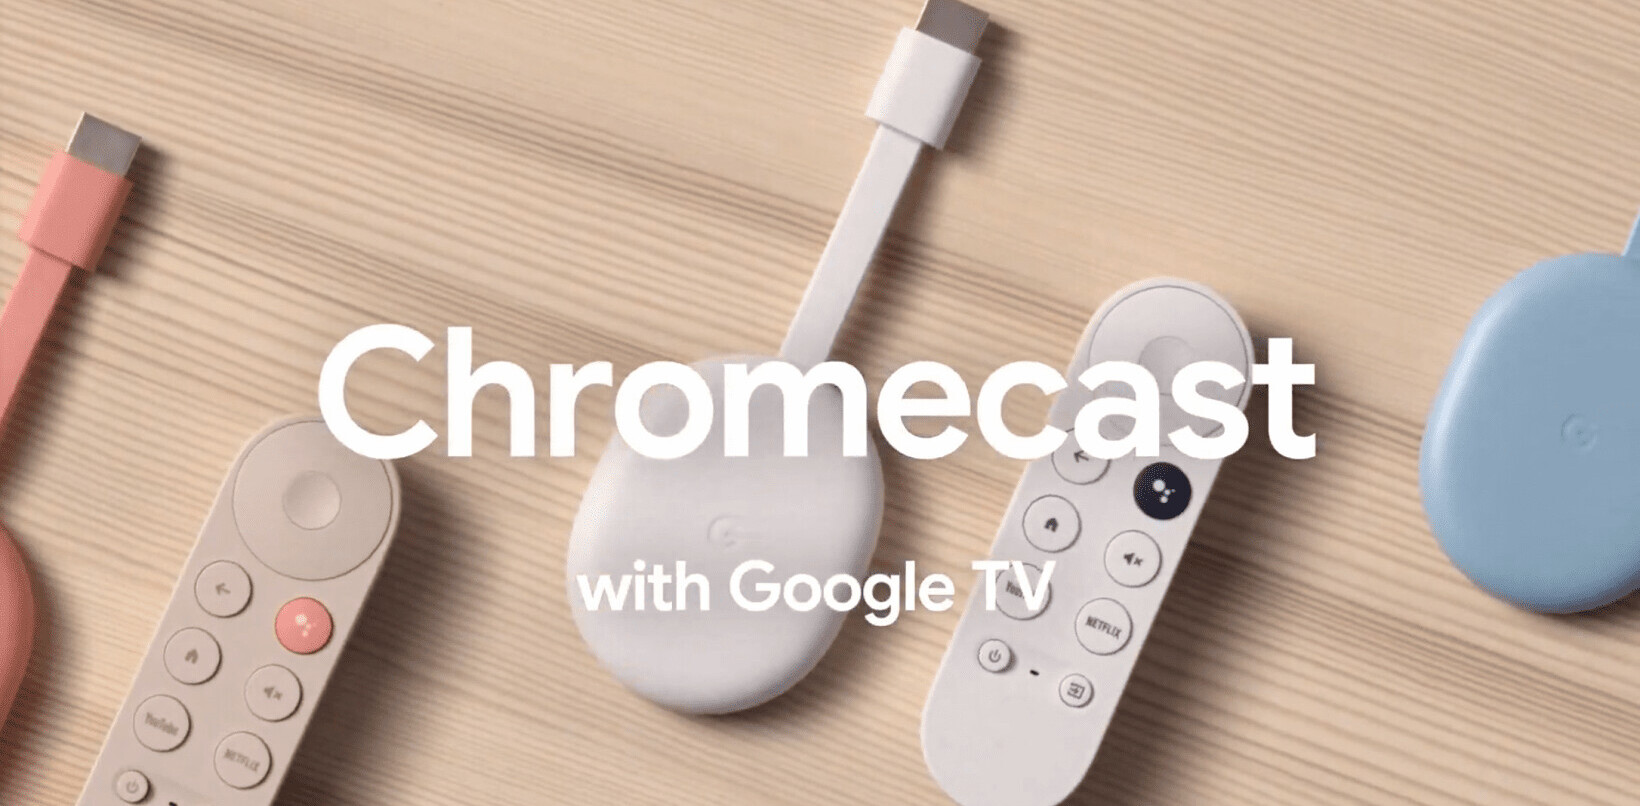 The new $50 Chromecast with ‘Google TV’ and a remote is now official